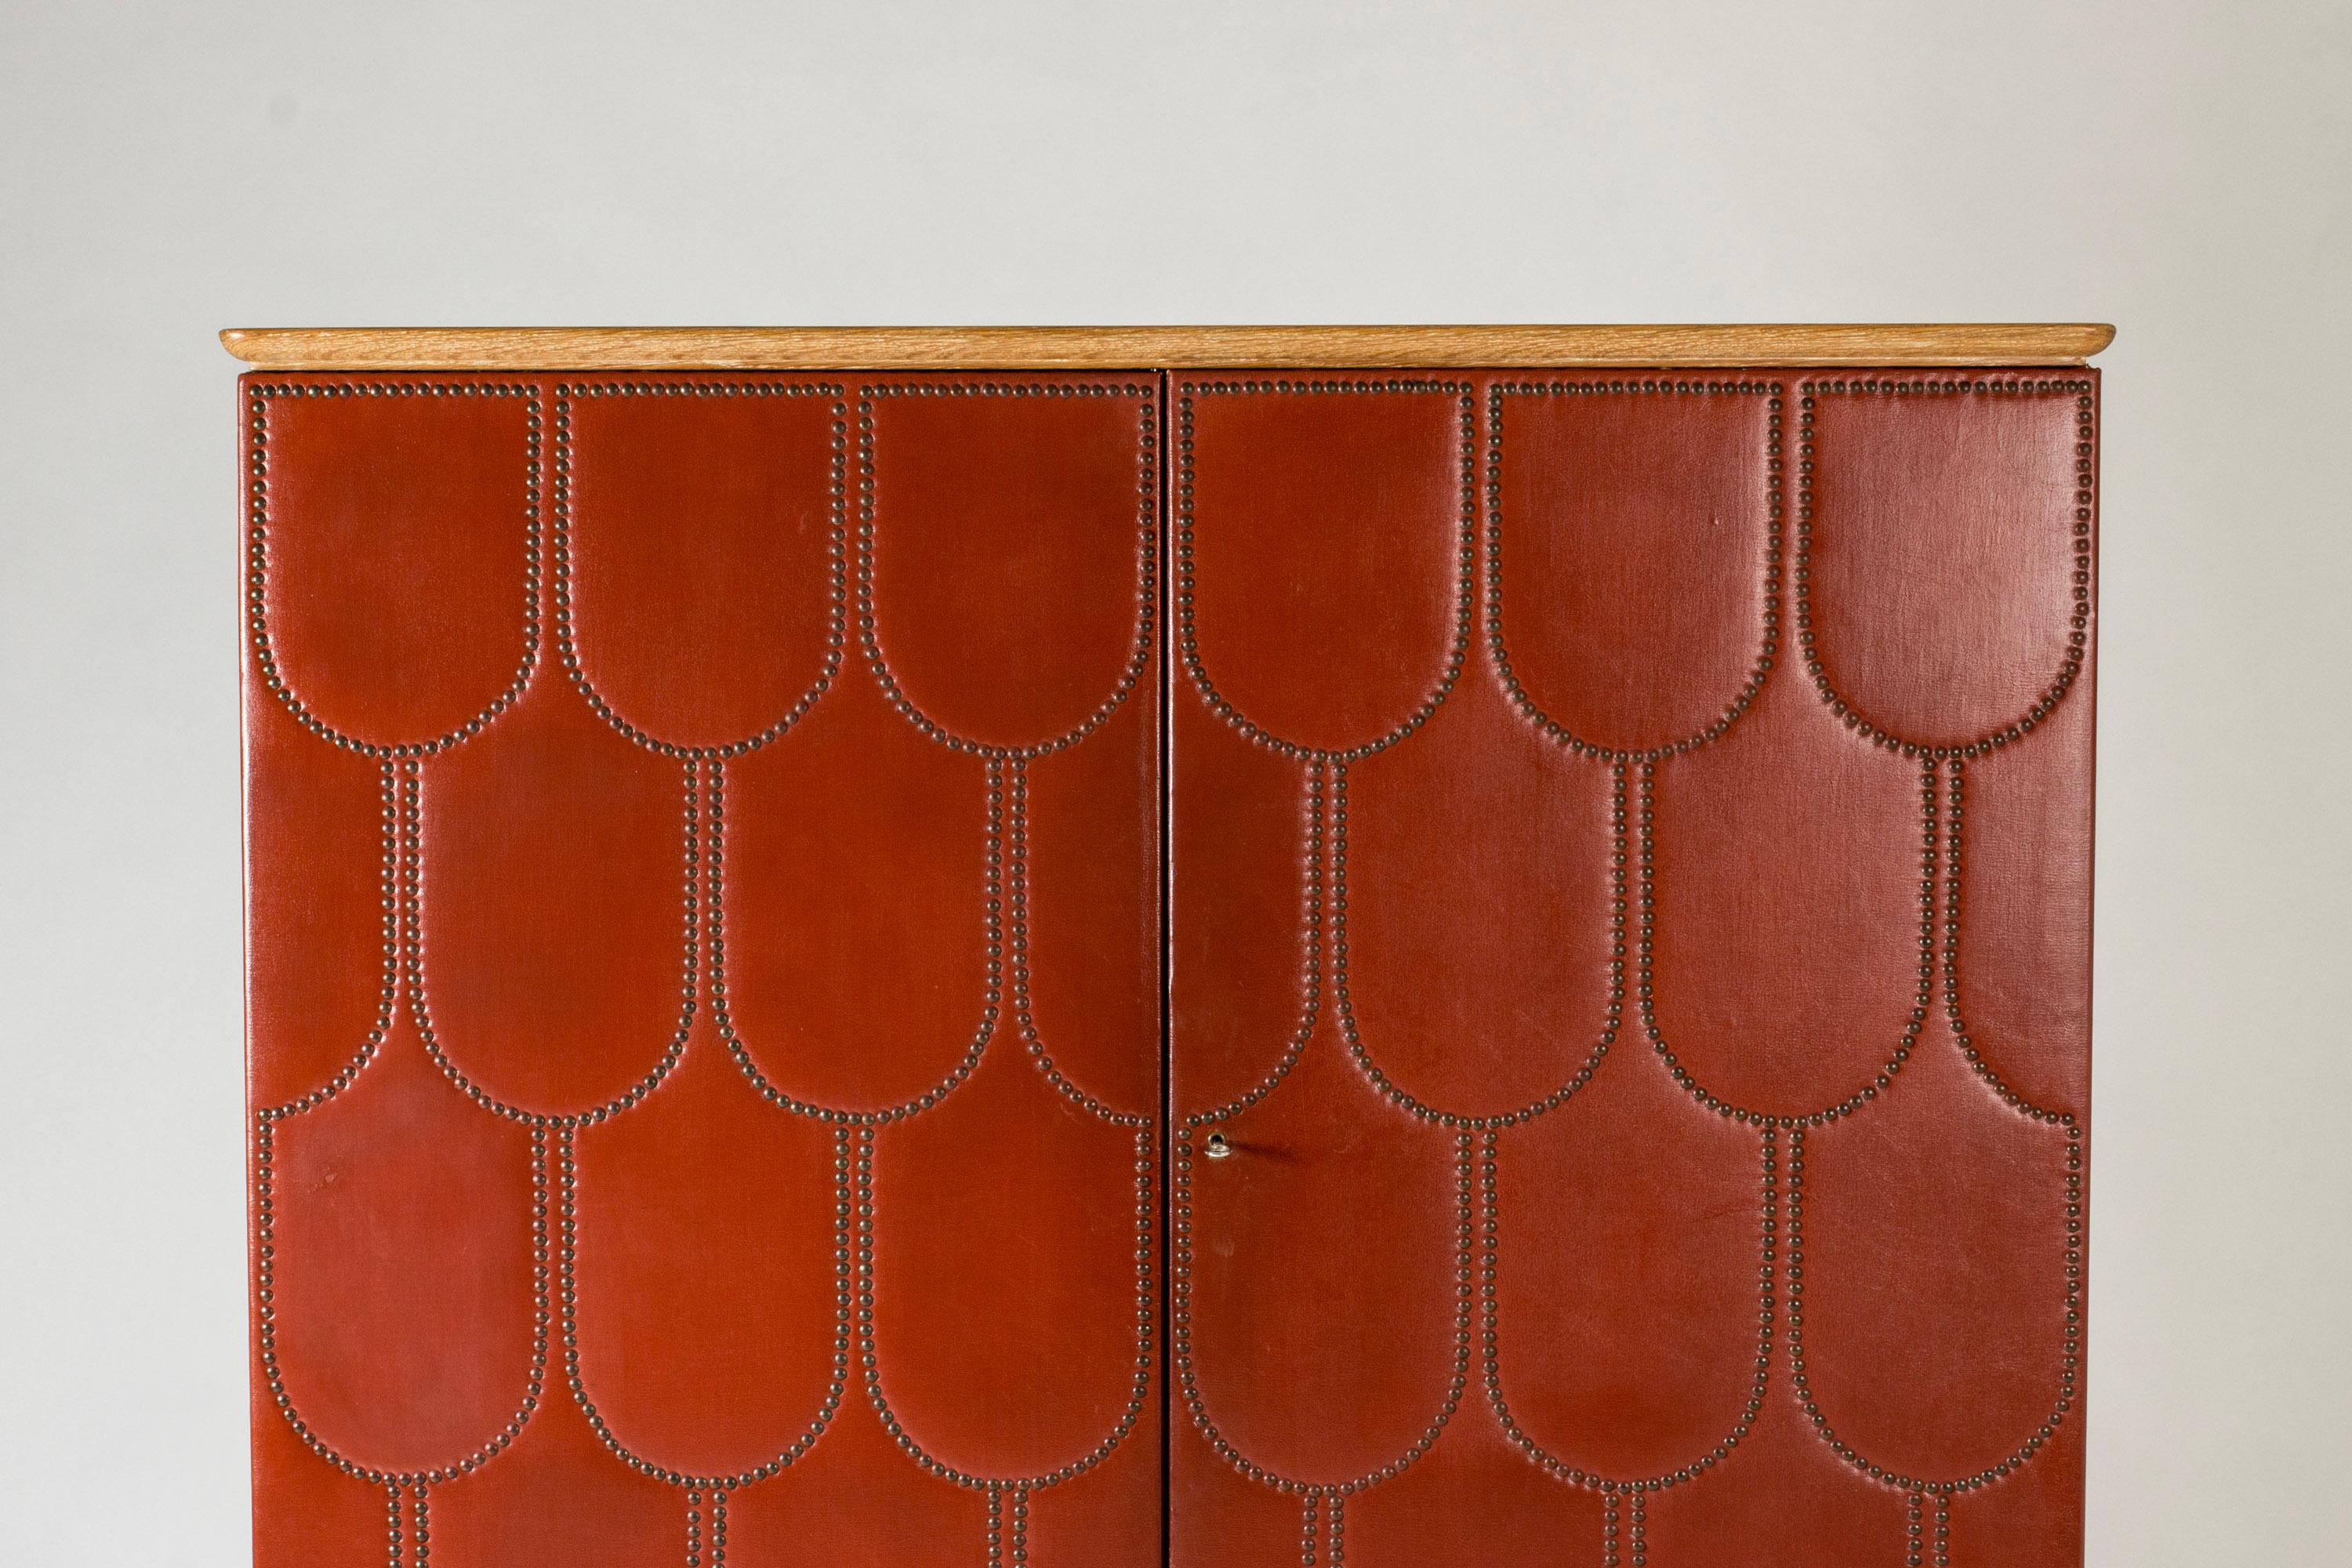 Amazing cabinet by Otto Schulz, in a bold design with oxblood colored faux leather front and sides. Decor of brass nails in a graphic pattern. White washed oak legs.